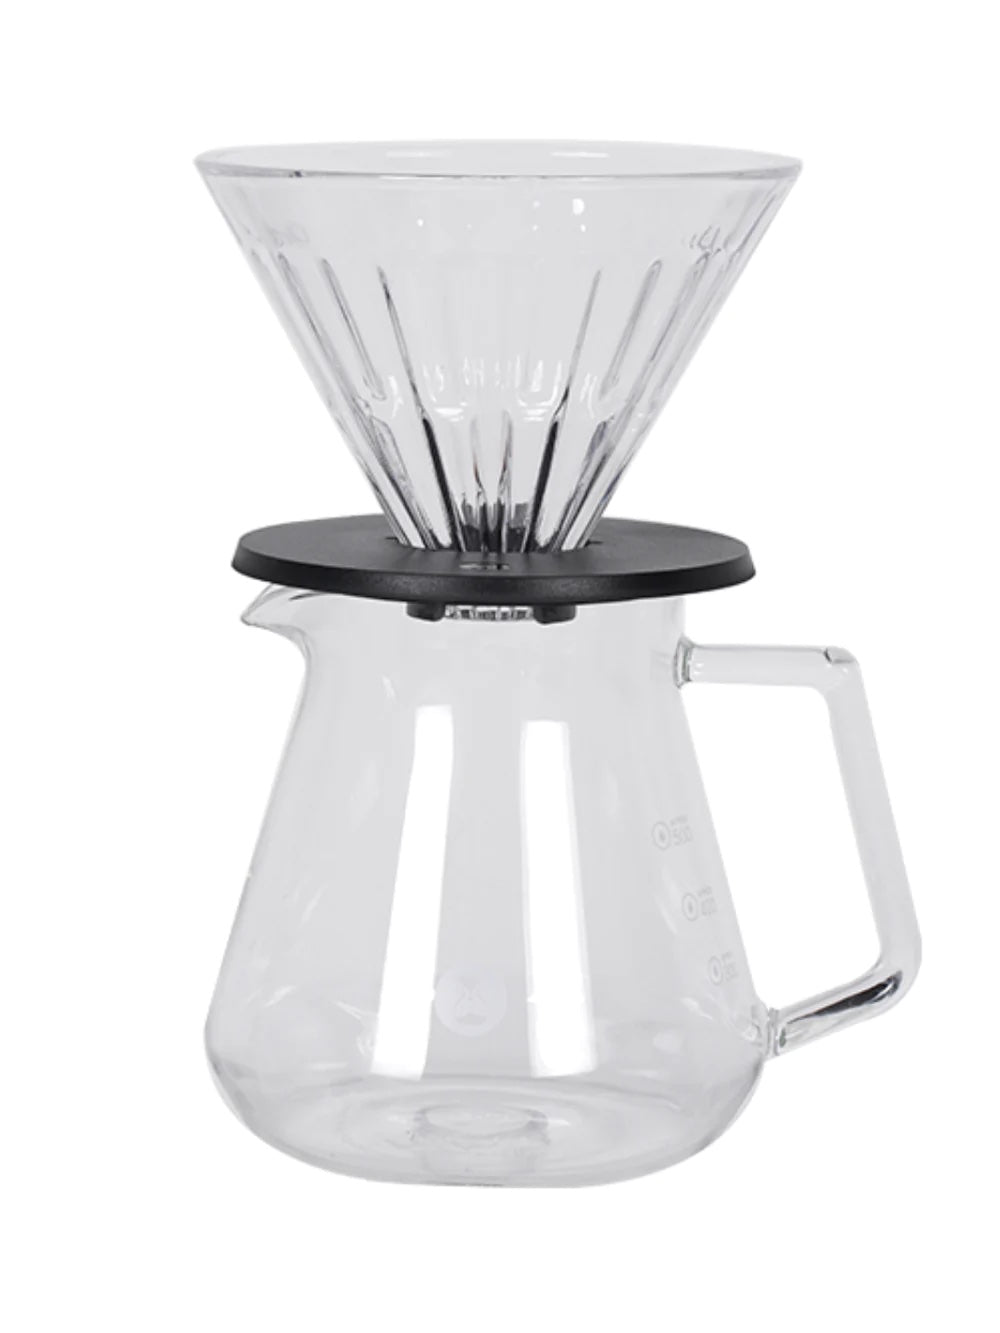 Timemore NANO 3 Carrying Case Pour Over Kit